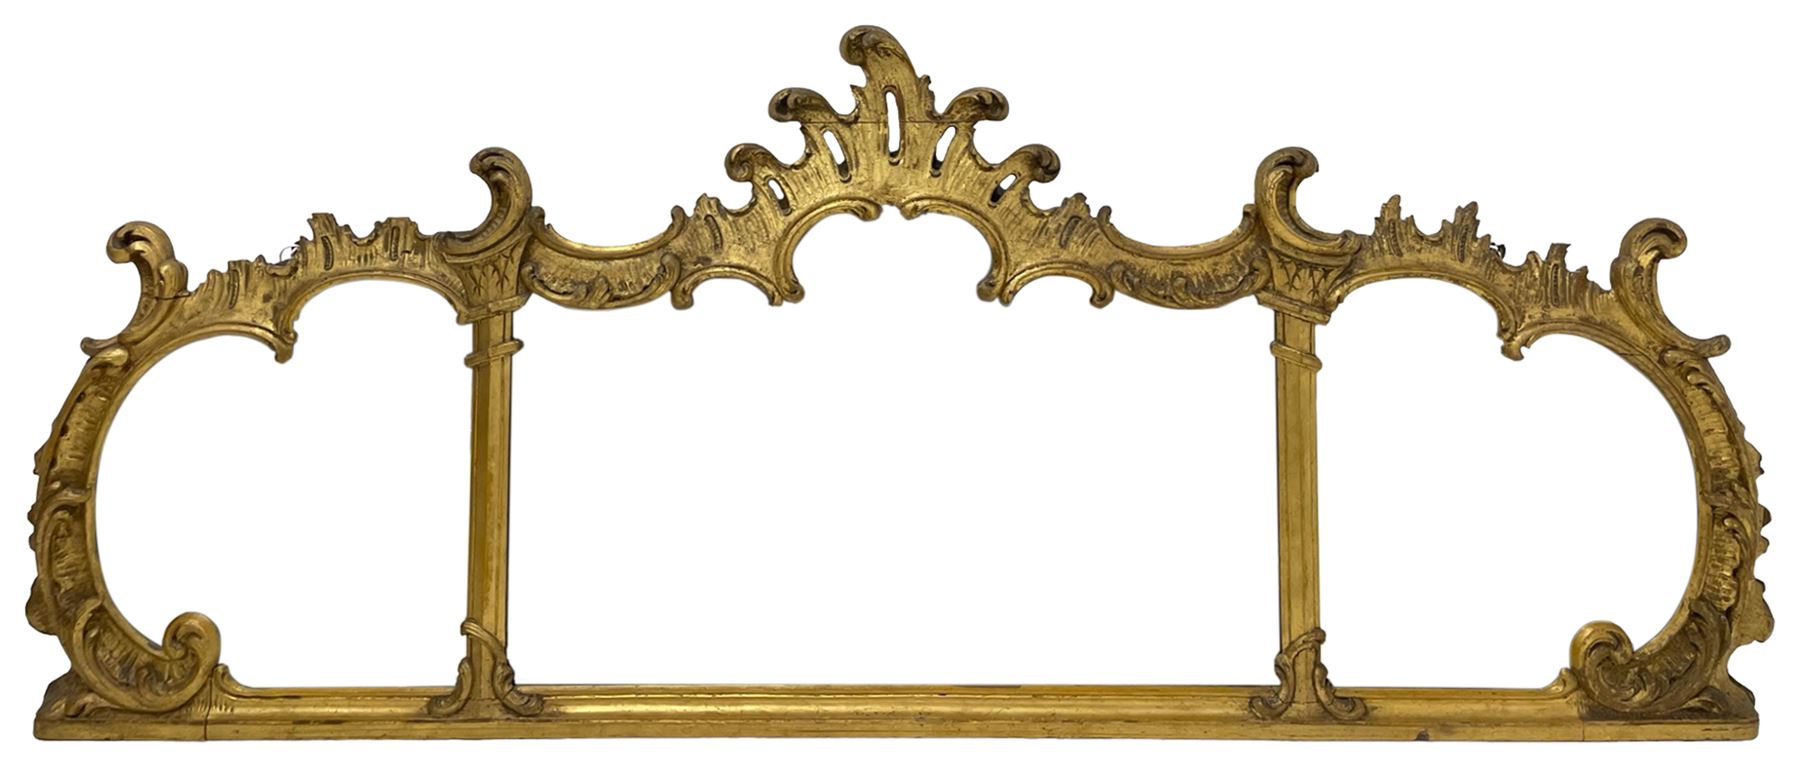 19th century giltwood and gesso overmantel mirror